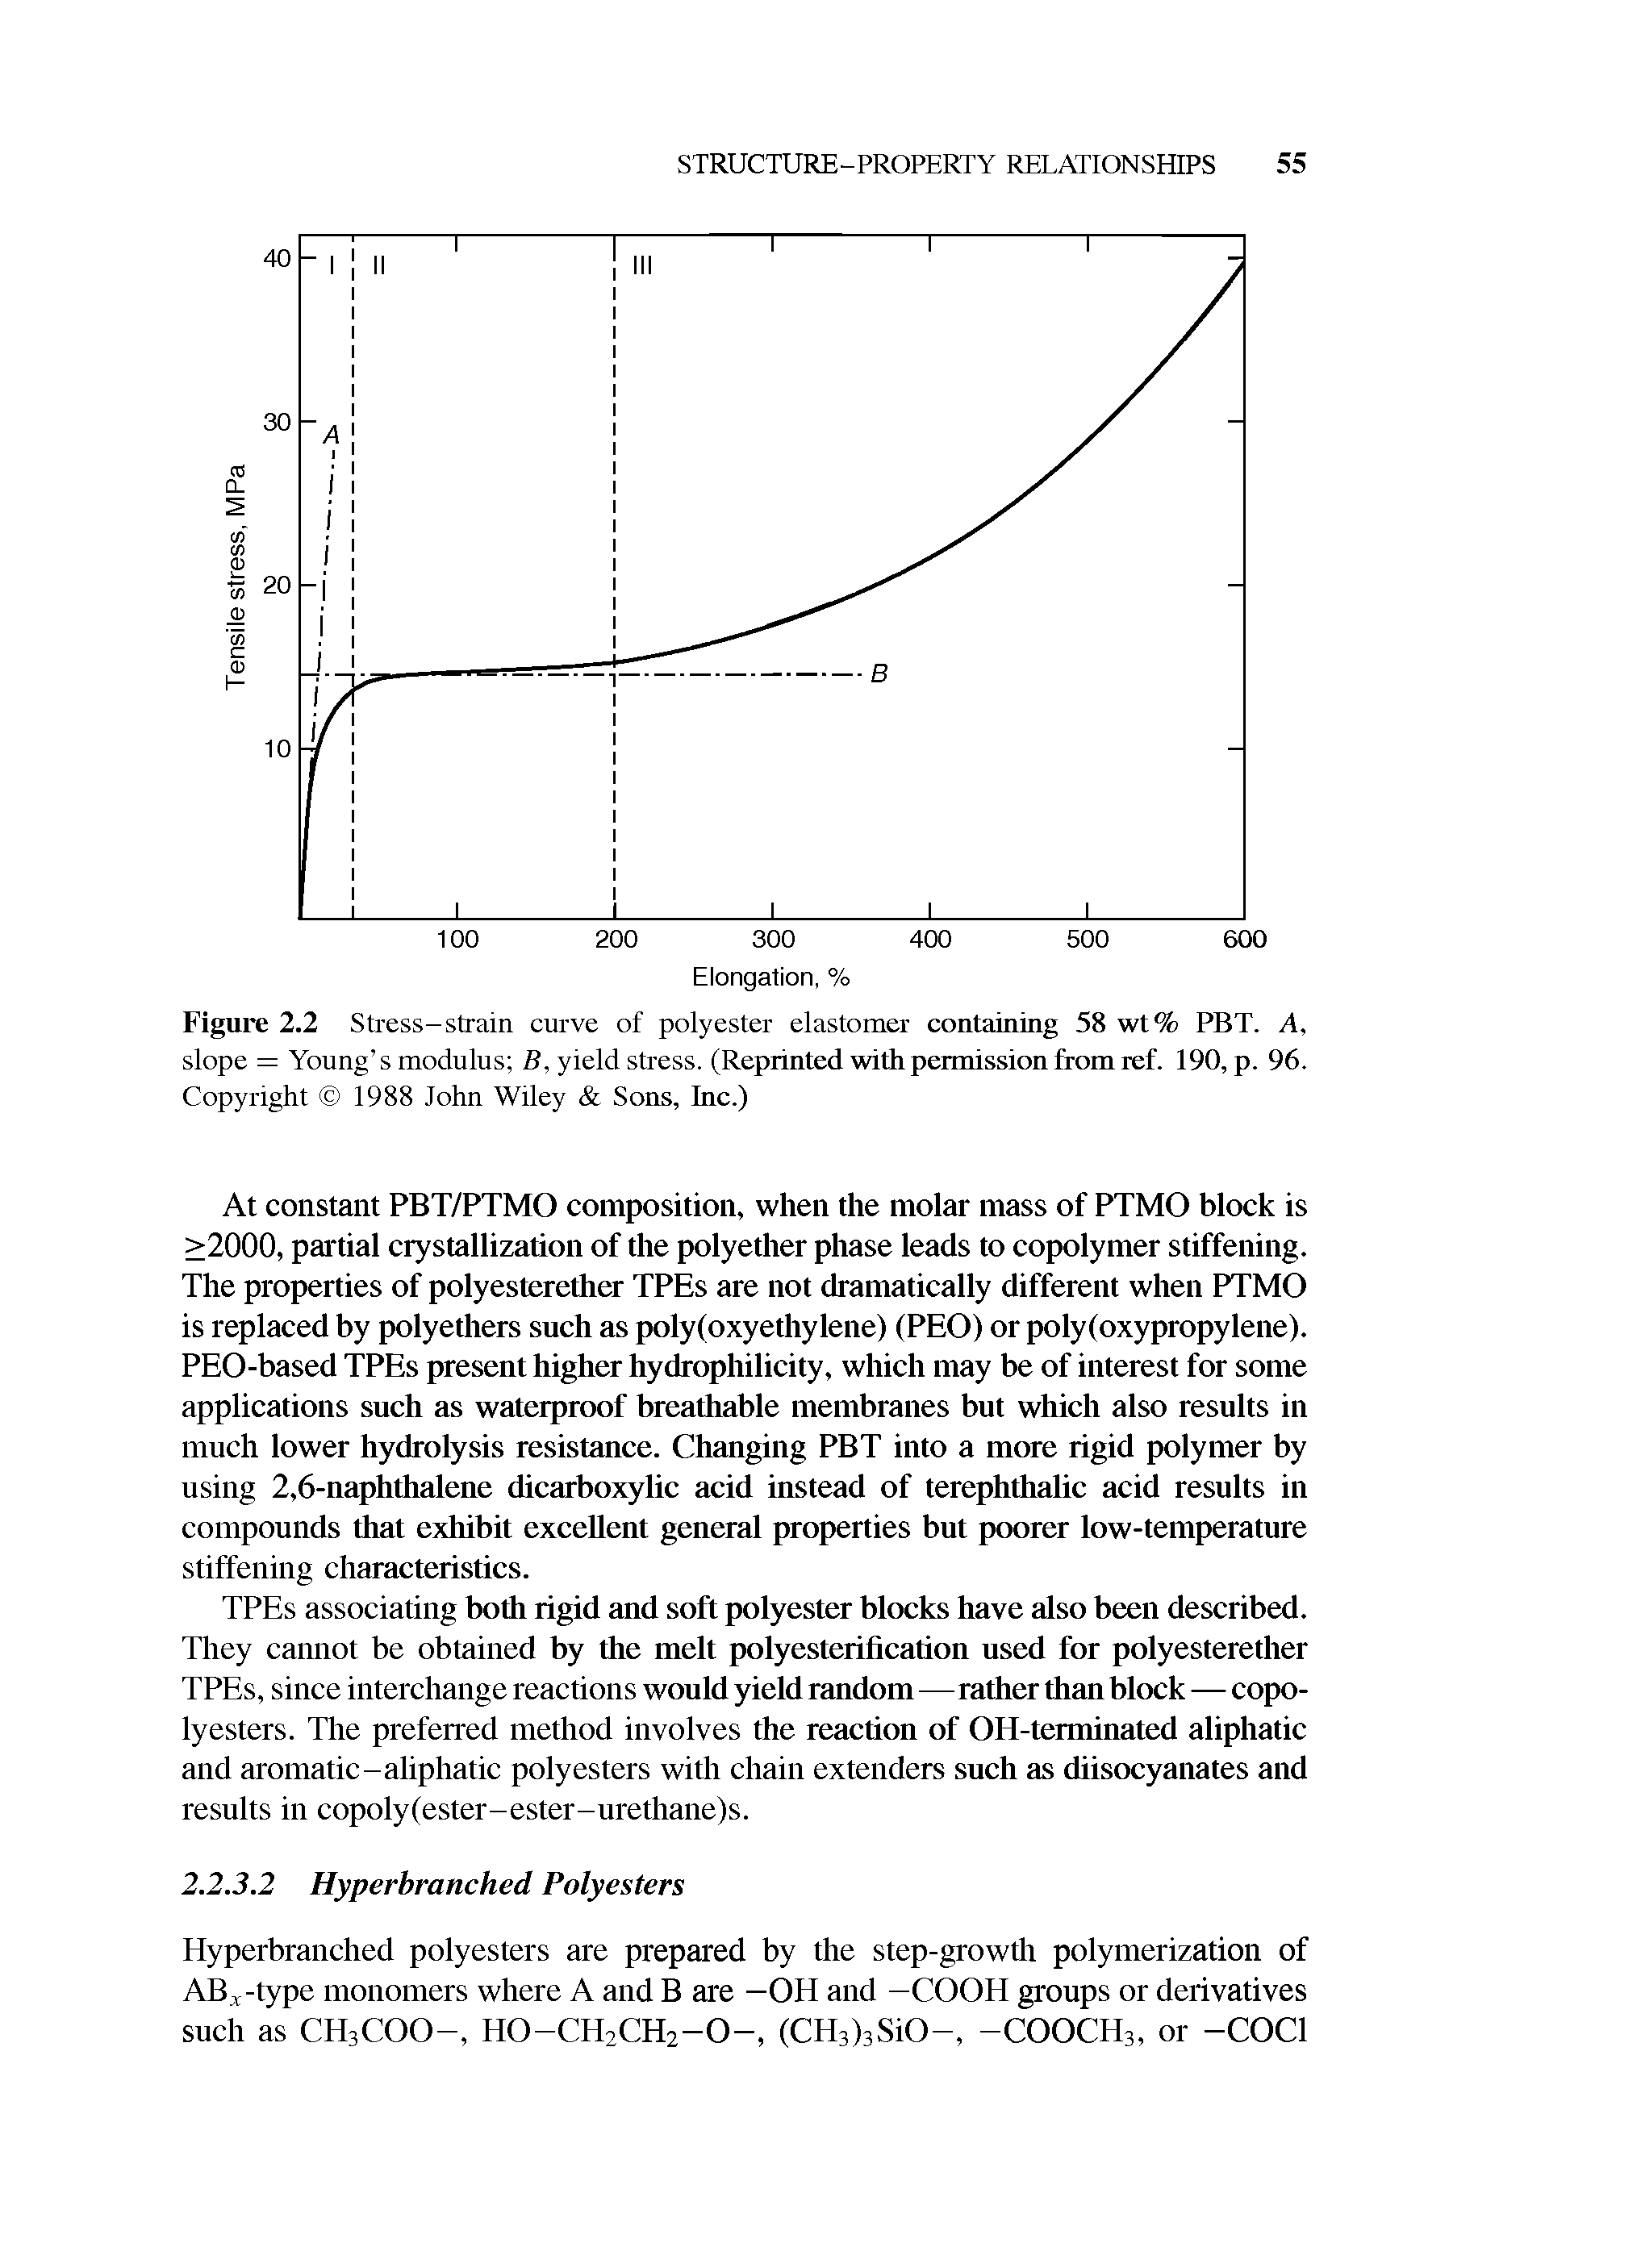 Figure 2.2 Stress-strain curve of polyester elastomer containing 58 wt% PBT. A, slope = Young s modulus B, yield stress. (Reprinted with permission from ref. 190, p. 96. Copyright 1988 John Wiley Sons, Inc.)...